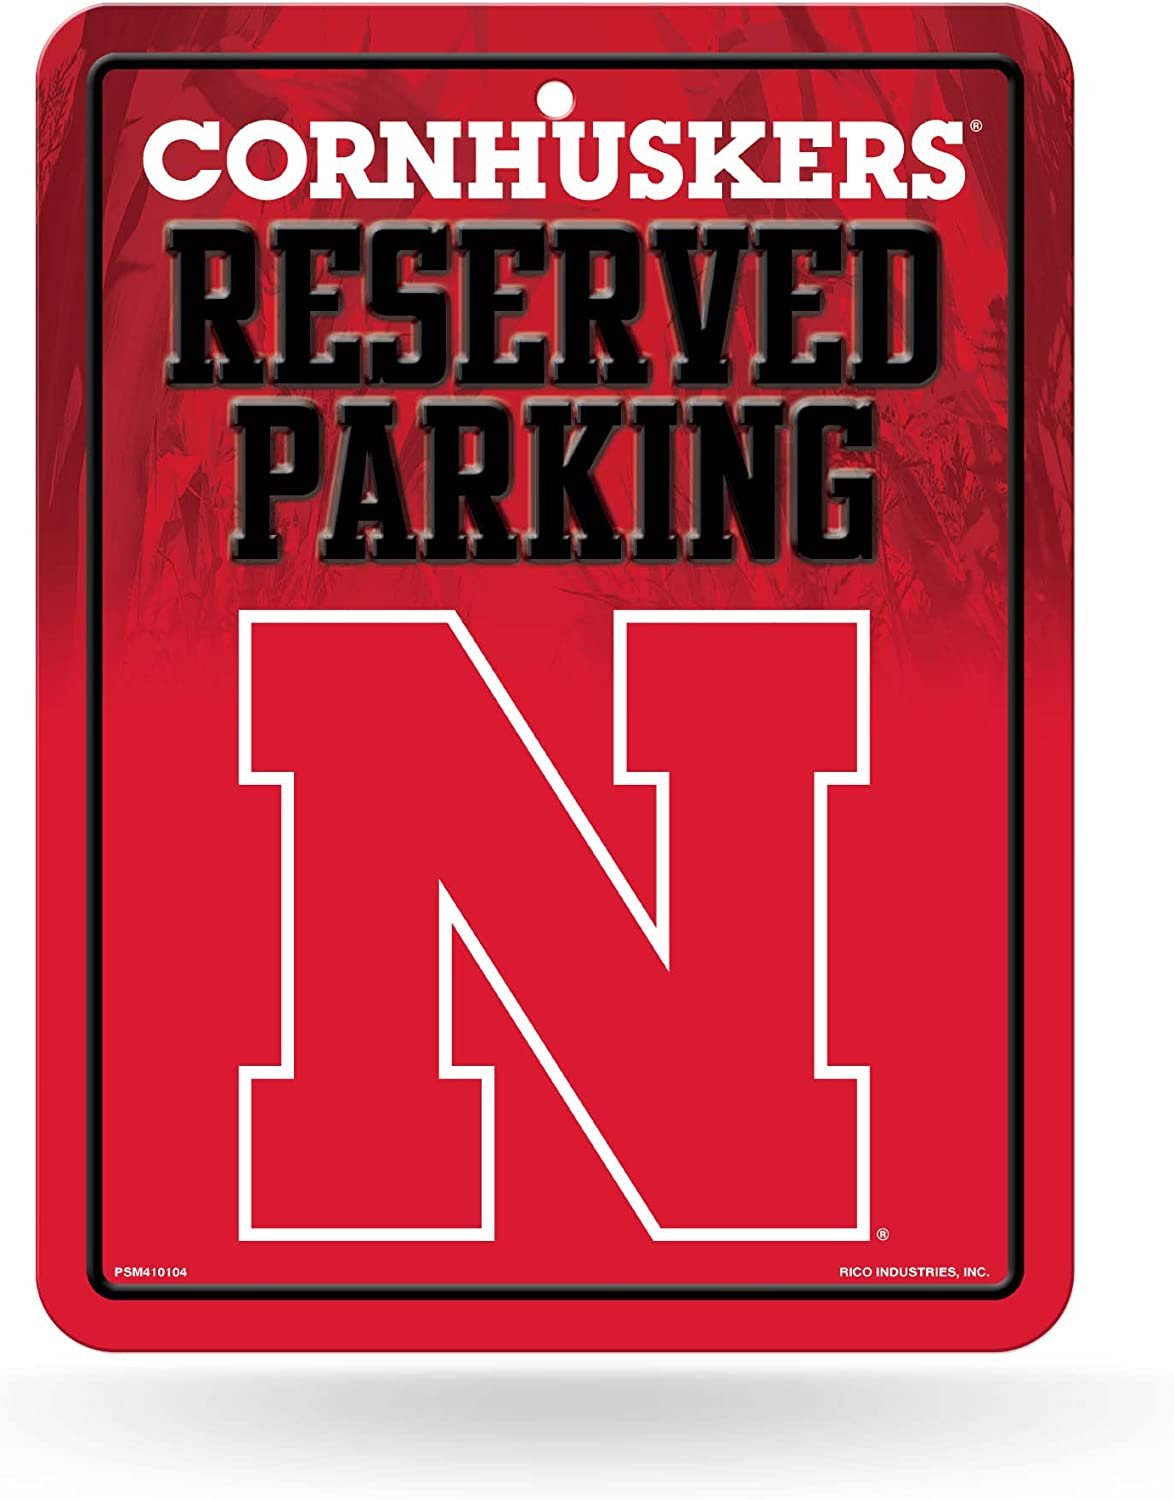 University of Nebraska Cornhuskers Metal Parking Sign 8.5" x 11" Great for Man Cave, Bed Room, Office, Home Décor